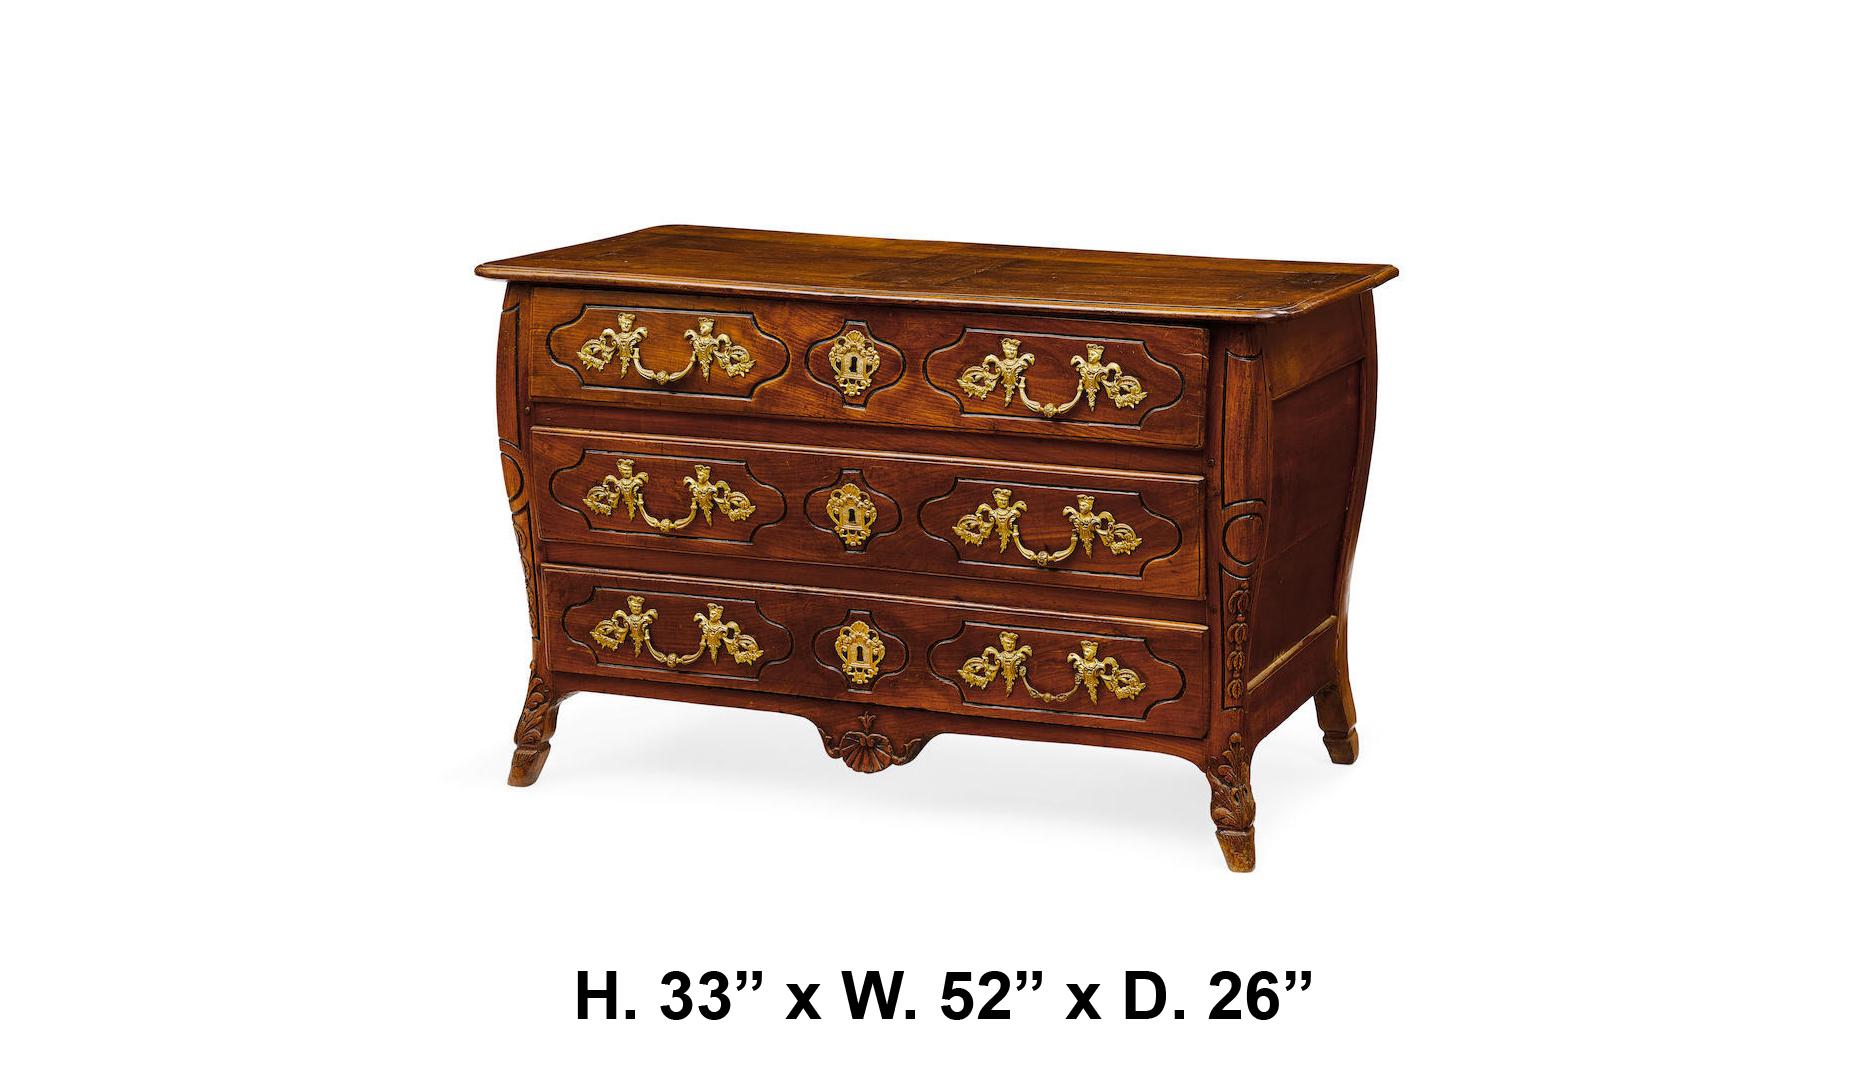 18th century French provincial Regence finely carved walnut three-drawer commode mounted with intricate gilt bronze handles, all on hoof feet.